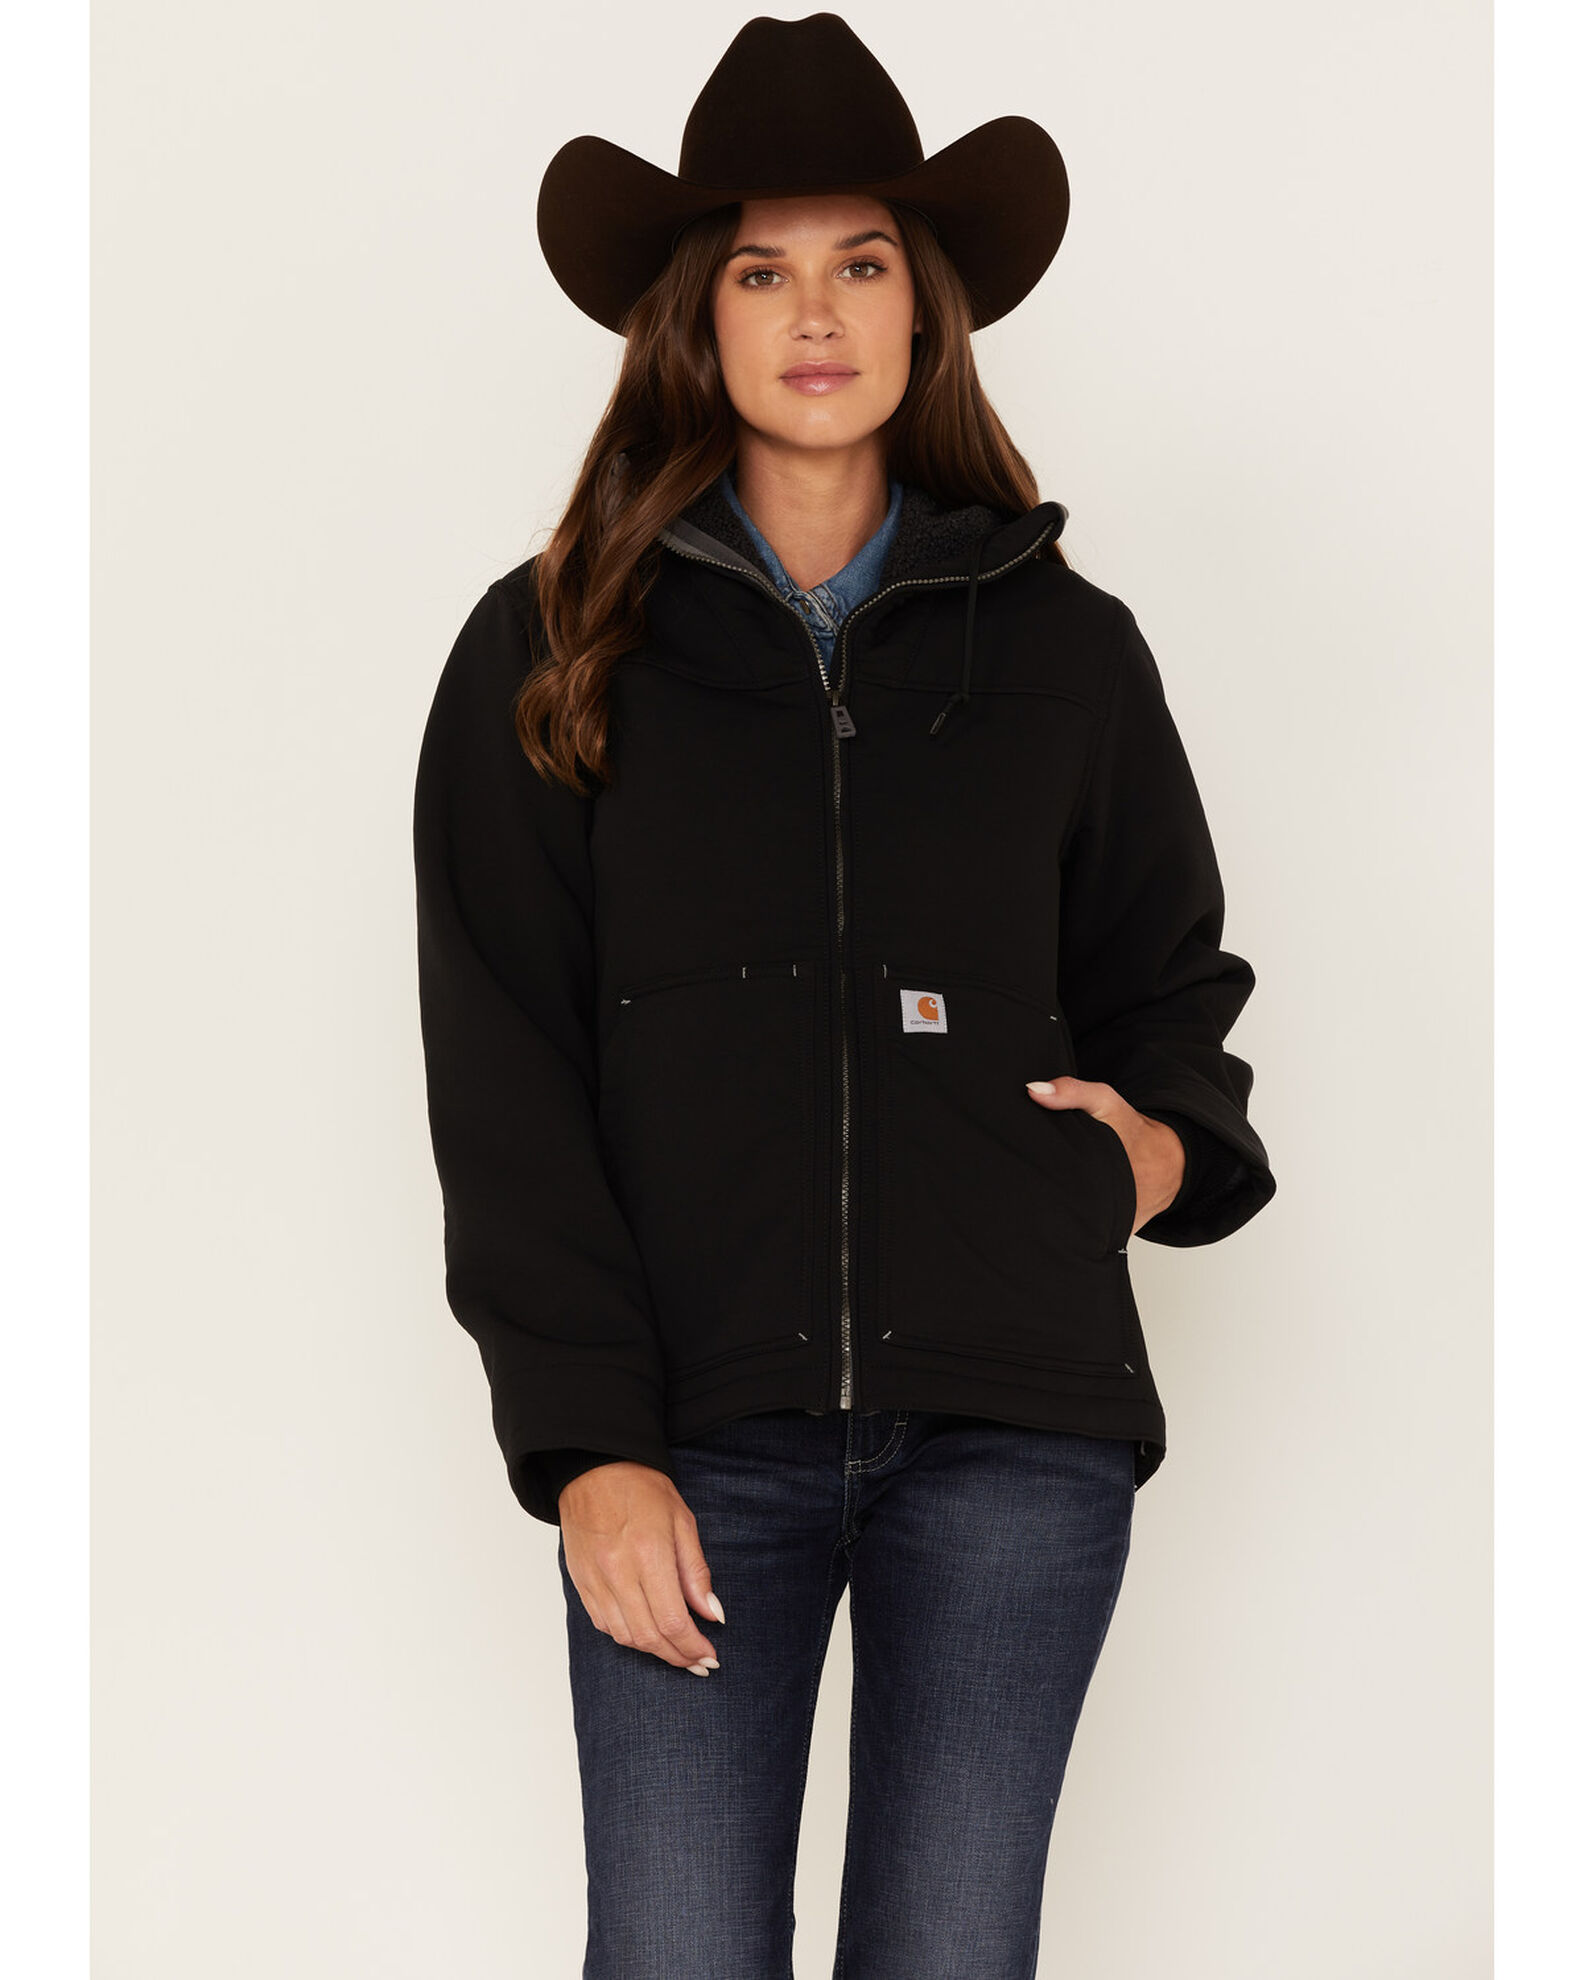 Product Name: Carhartt Women's Super Dux Relaxed Fit Zip-Front Sherpa-Lined  Work Jacket